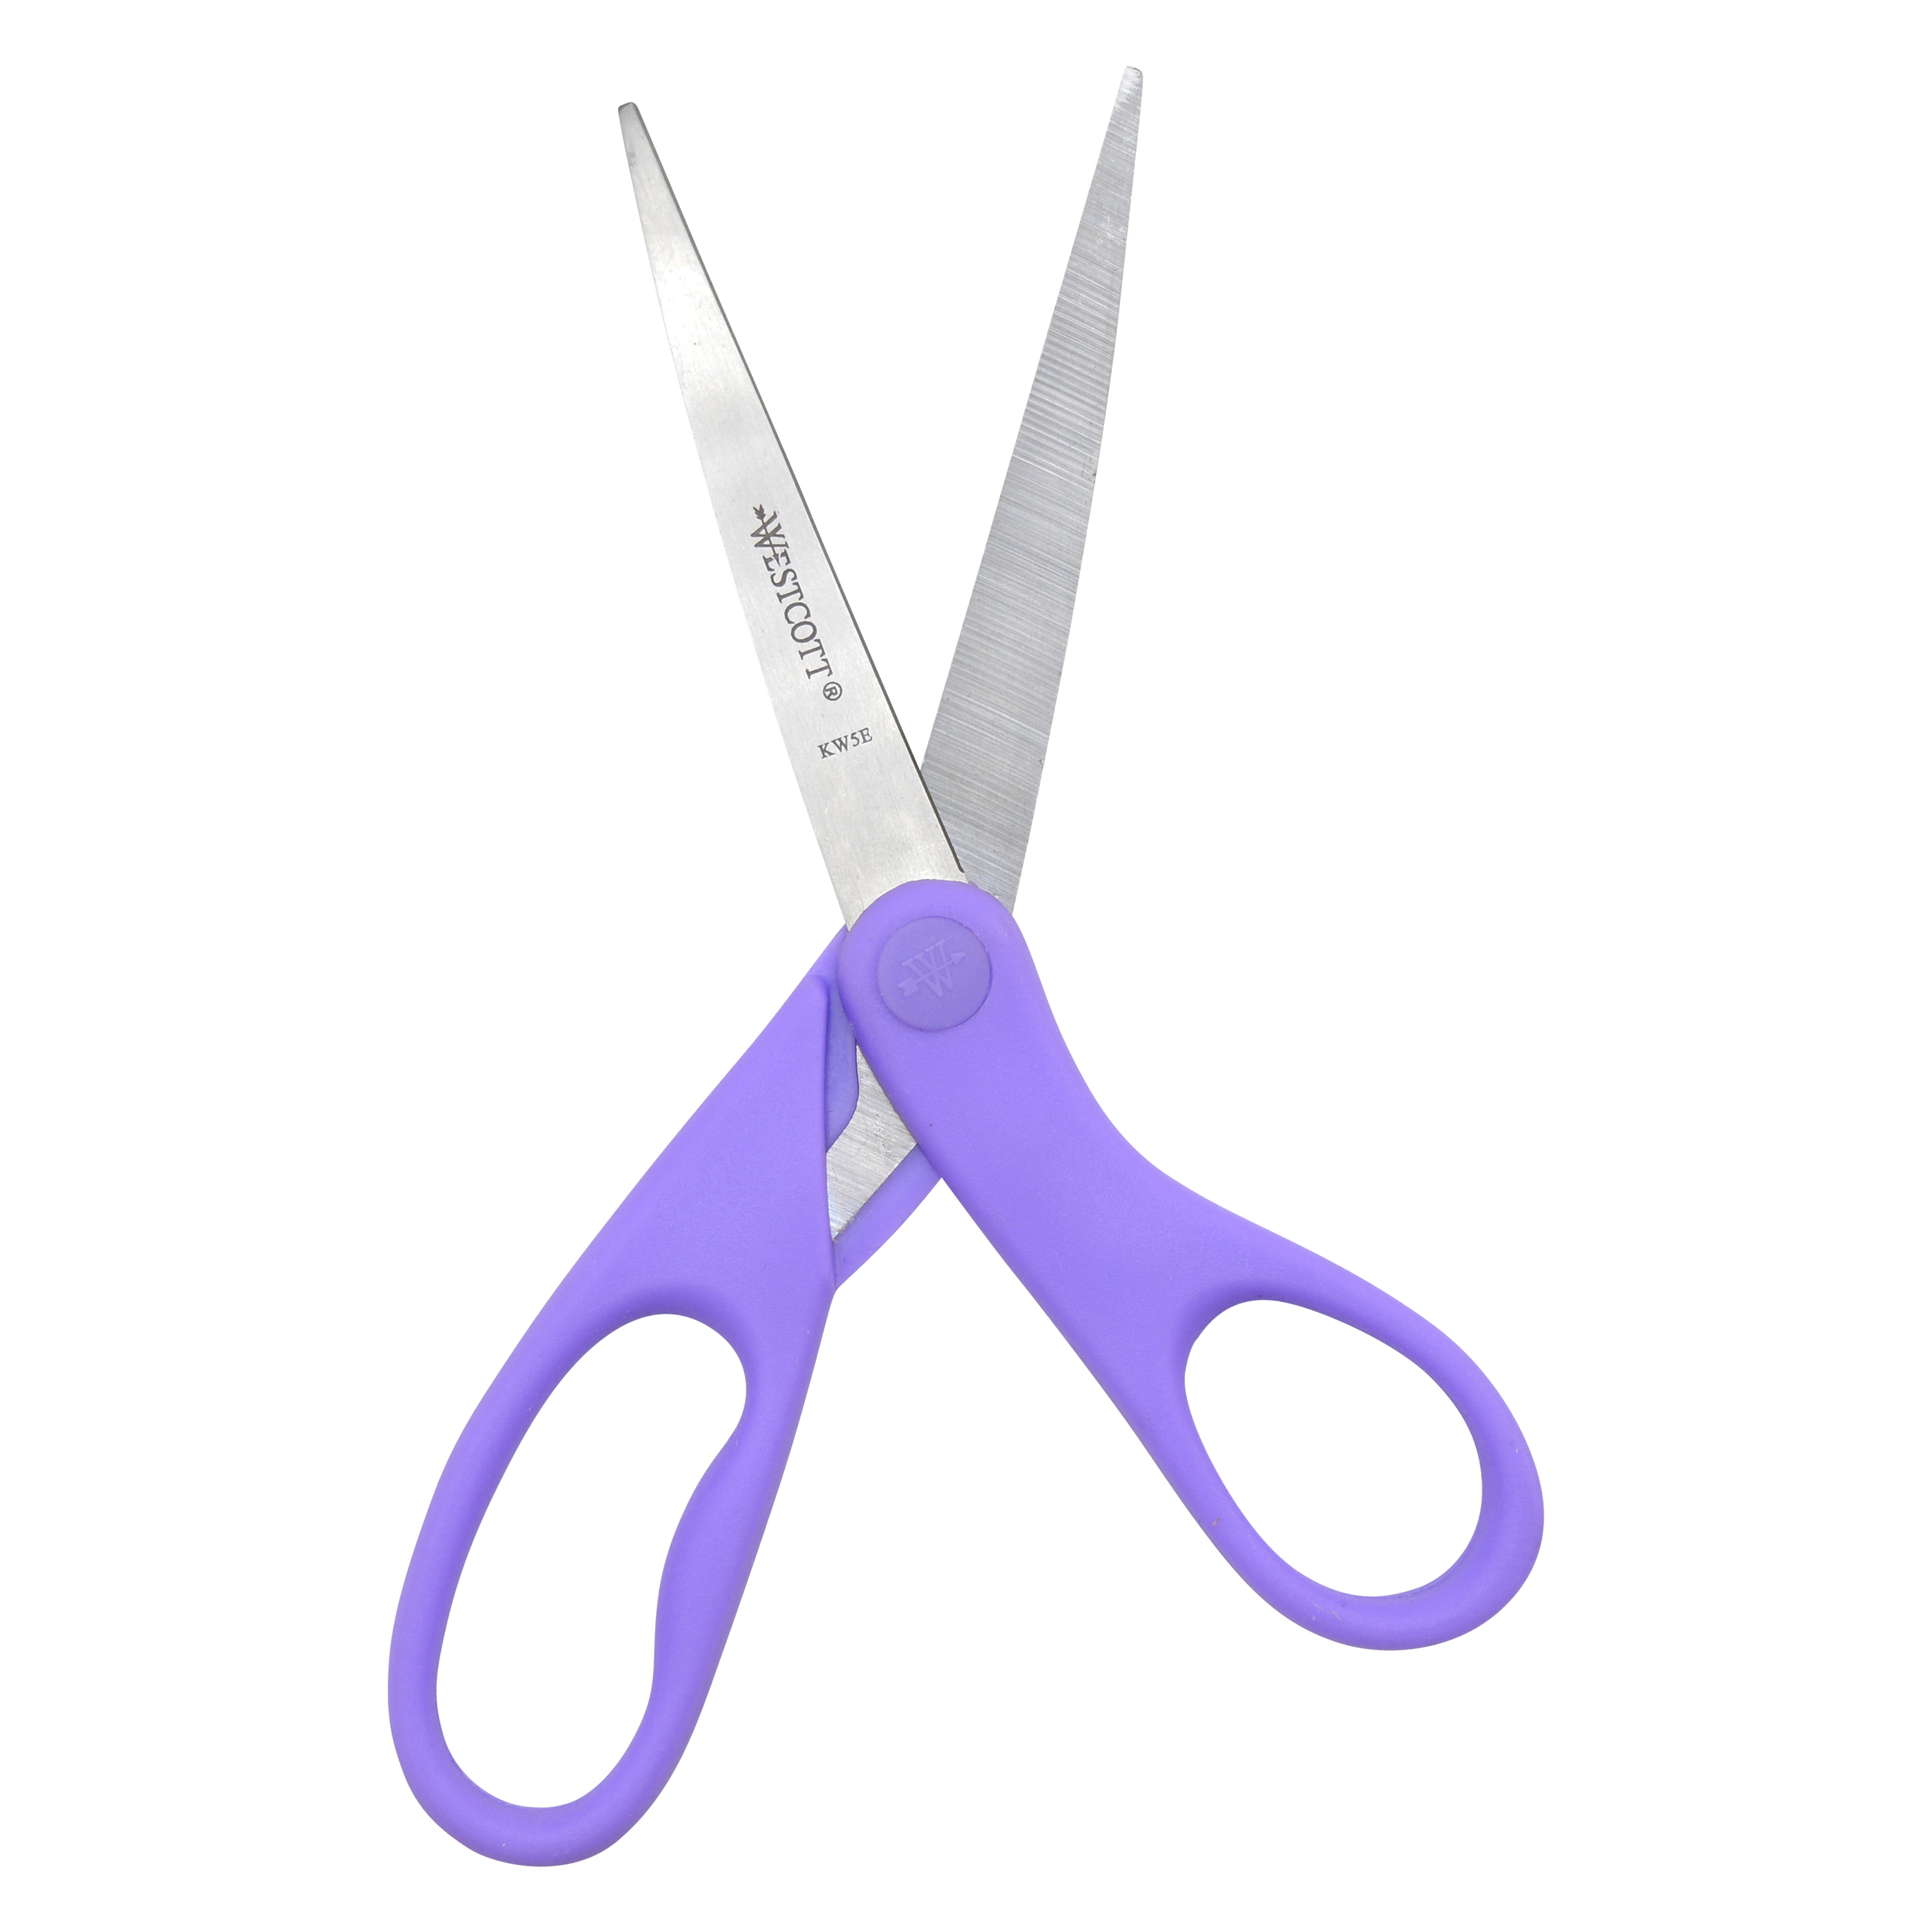 Westcott - Westcott 7 Student Scissors With Anti-microbial Protection,  Assorted Colors (14231)